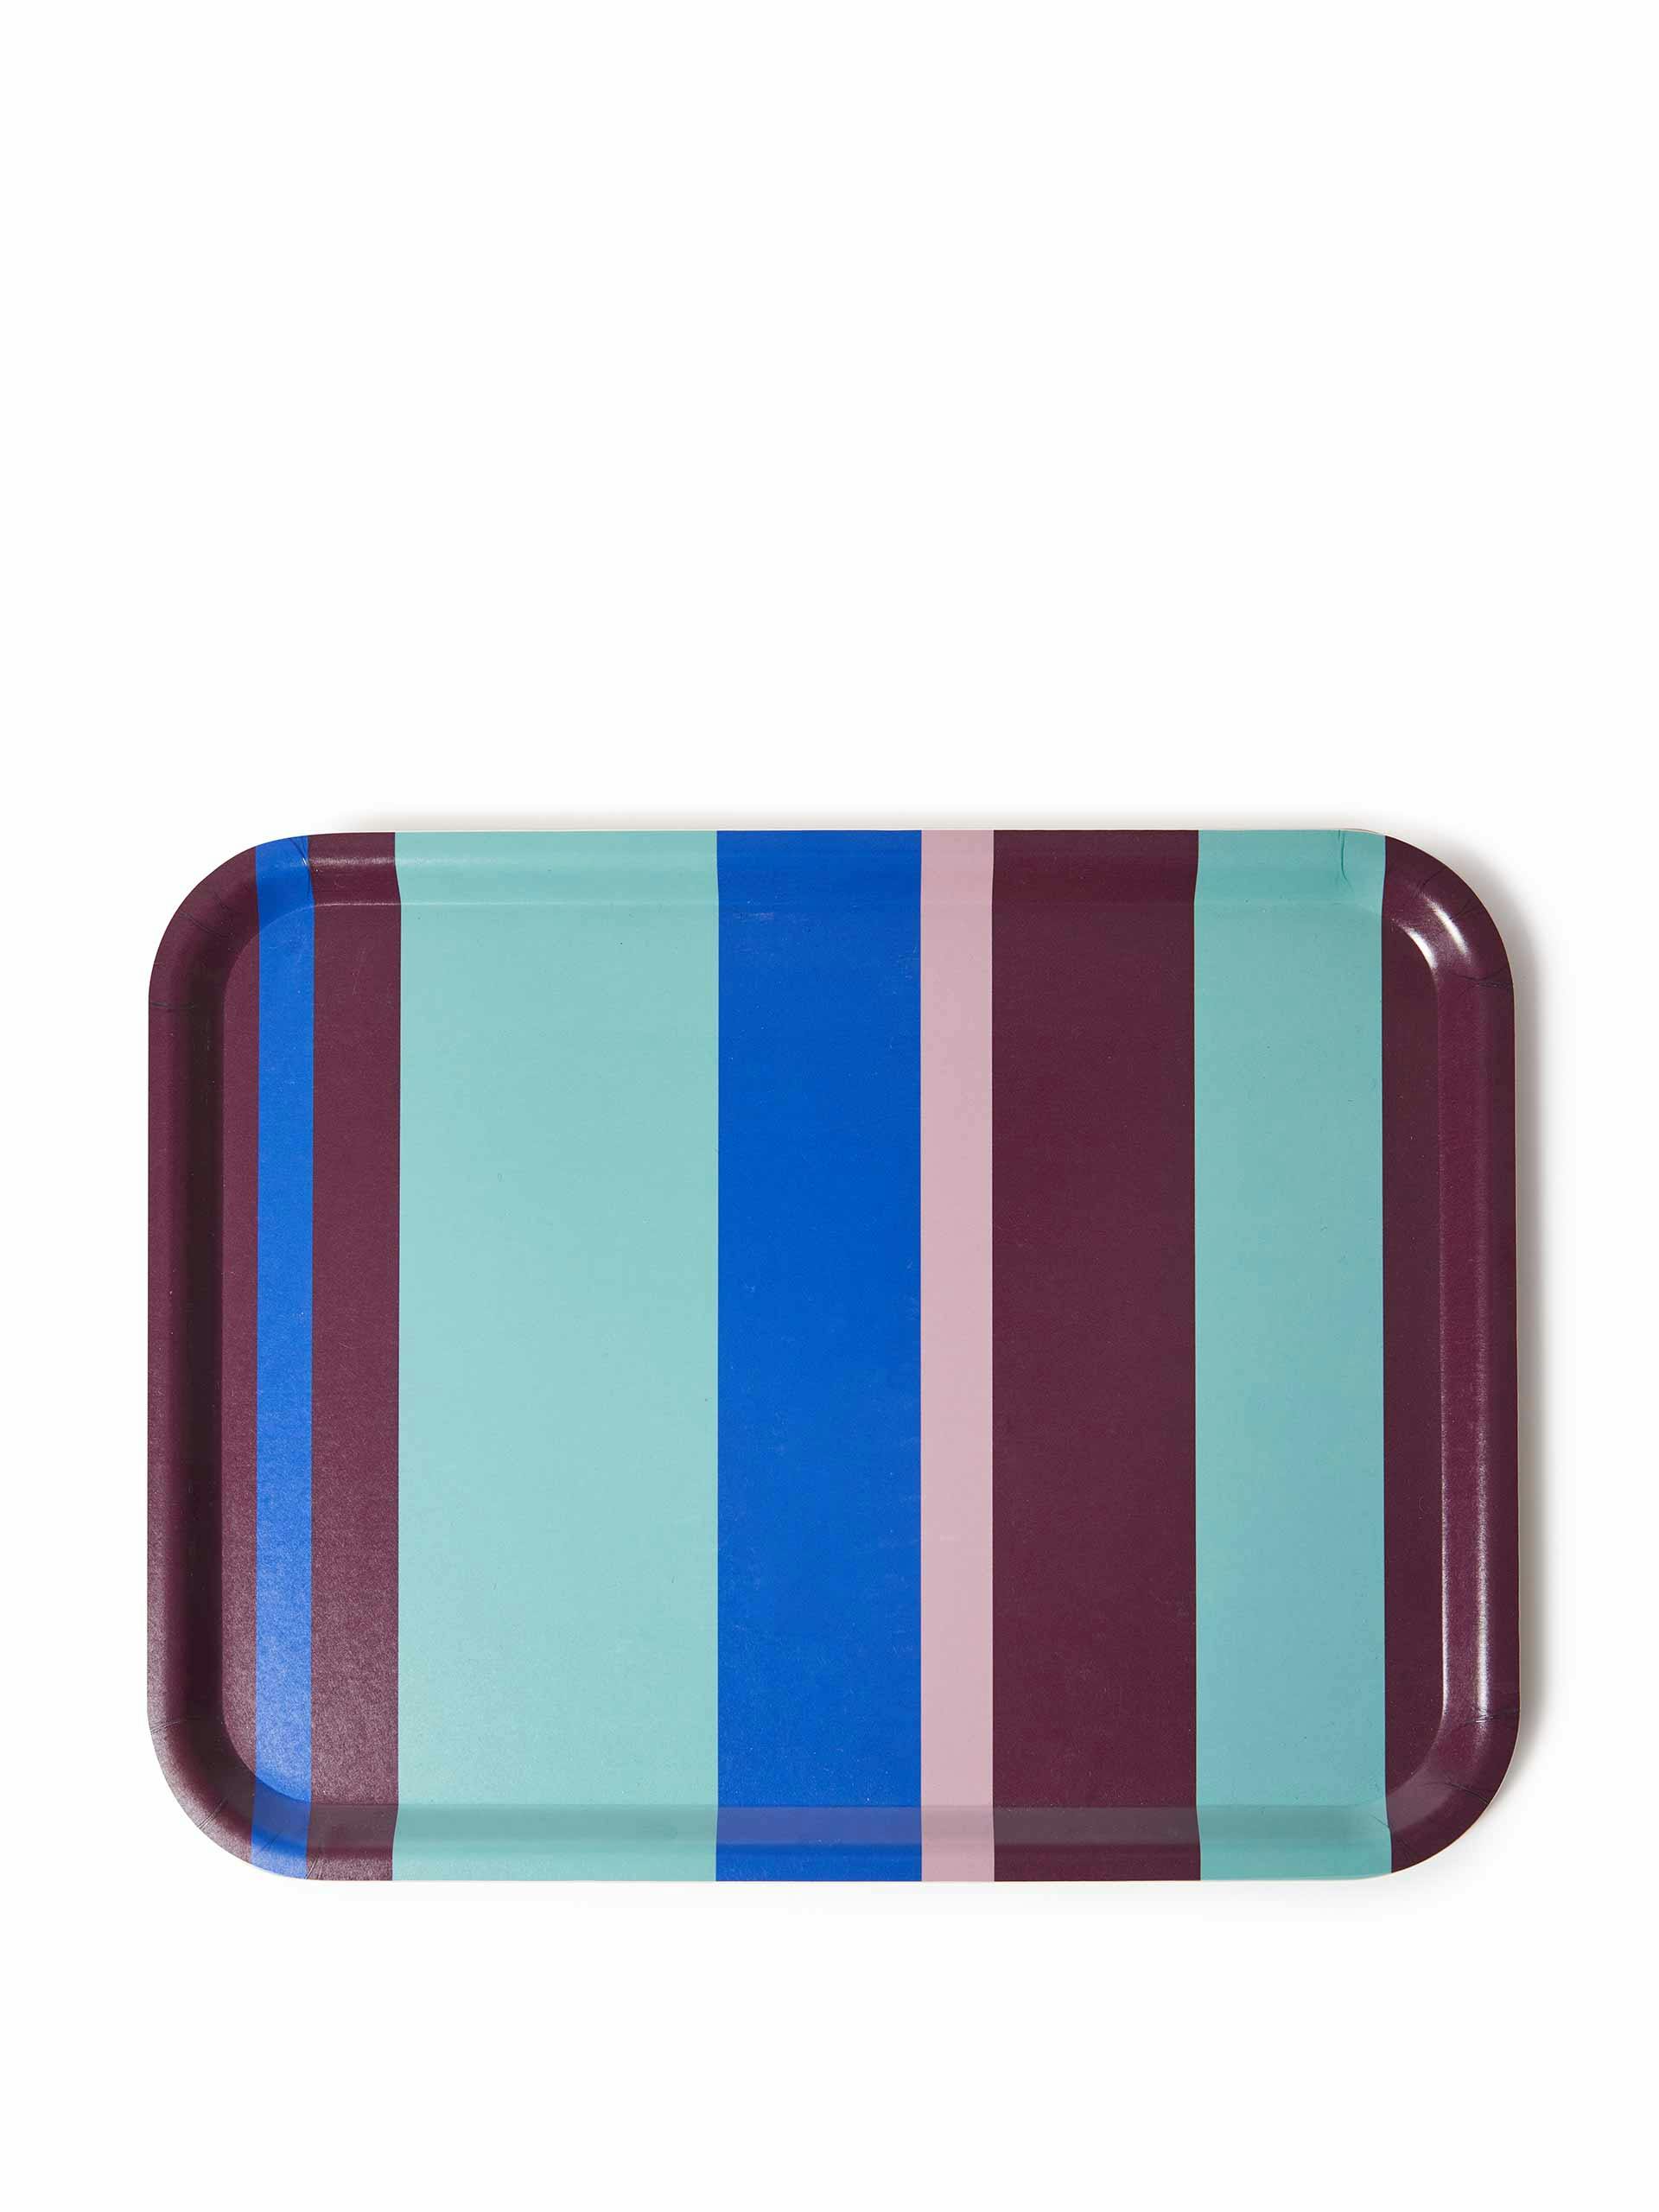 Large pink and turquoise striped tray